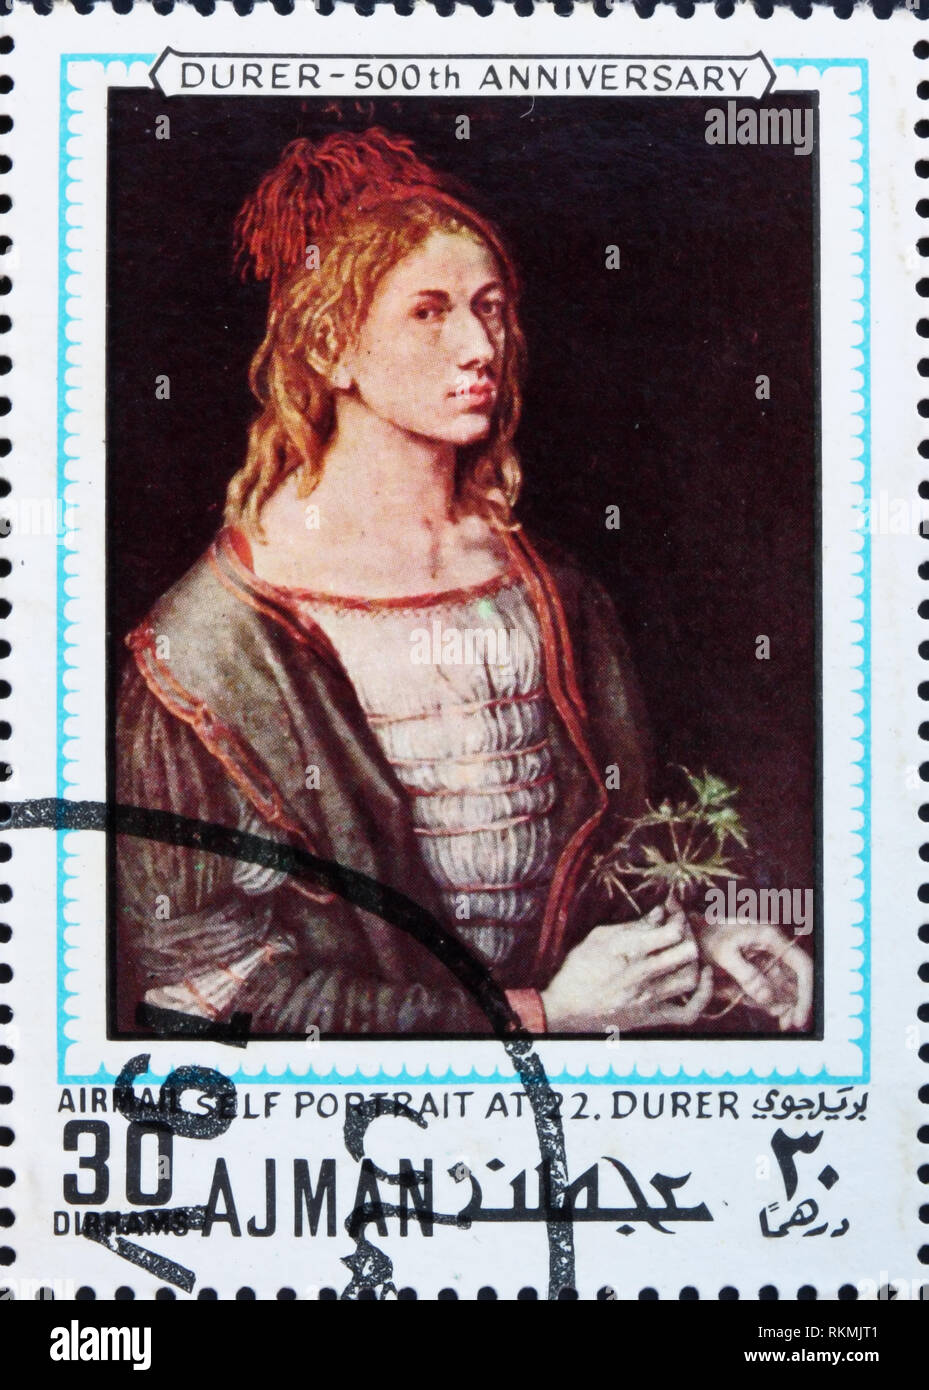 AJMAN - CIRCA 1970: a stamp printed in the Ajman shows Self Portrait at 22, Painting by Albrecht Durer, 500th Anniversary of the Birth, circa 1970 Stock Photo